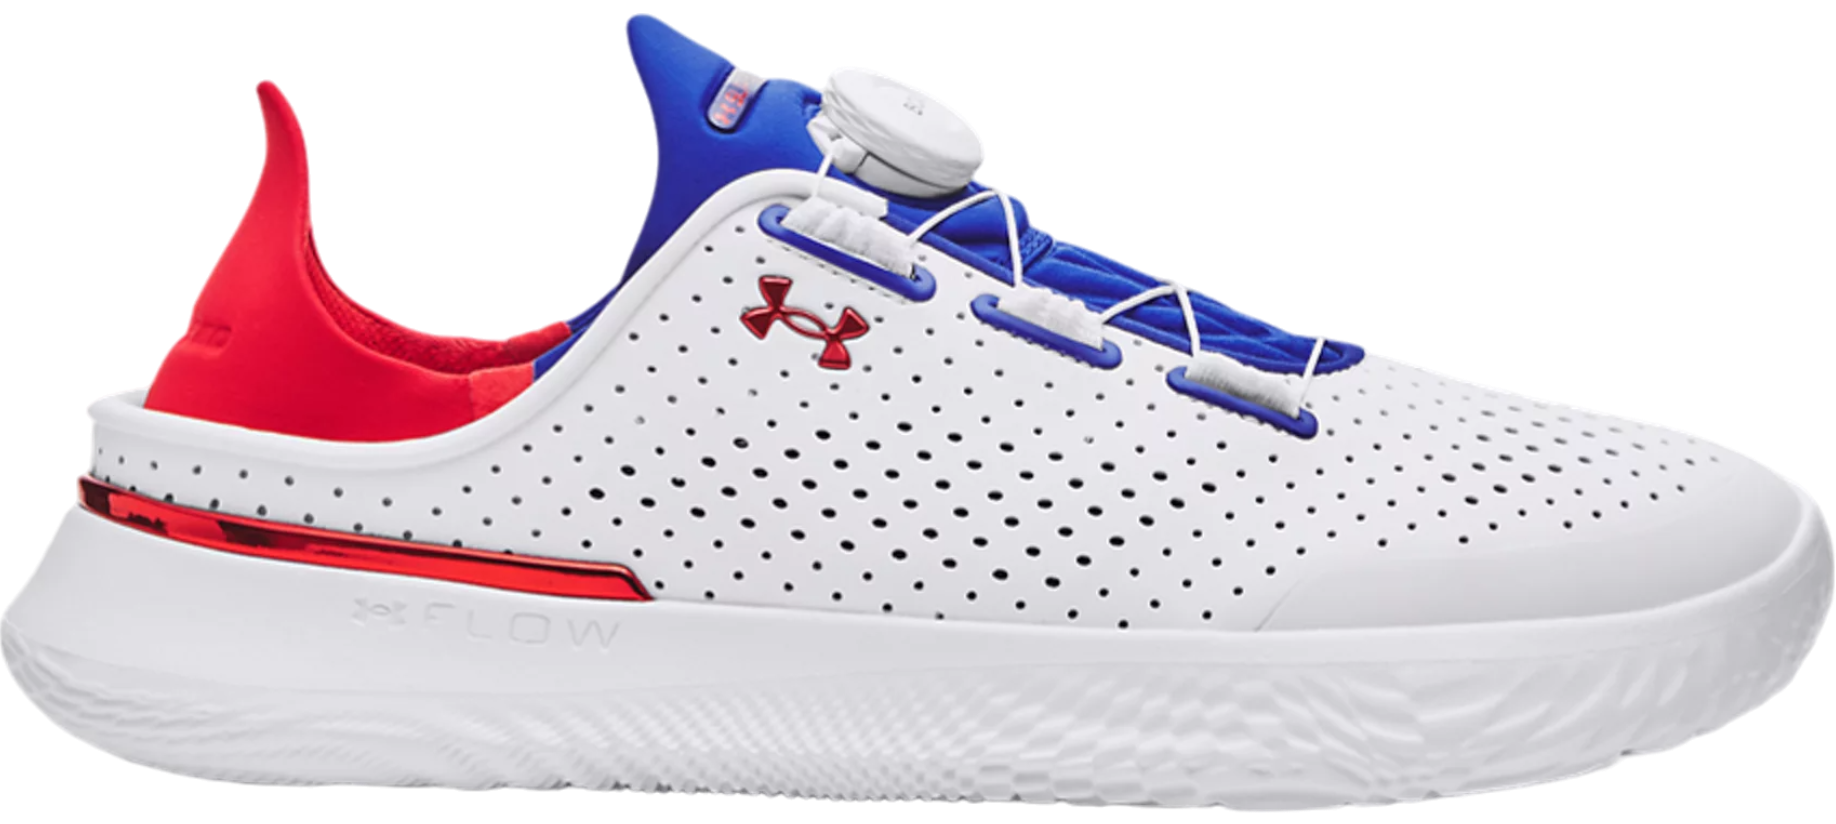 Scarpe fitness Under Armour Flow Slipspeed Trainr SYN